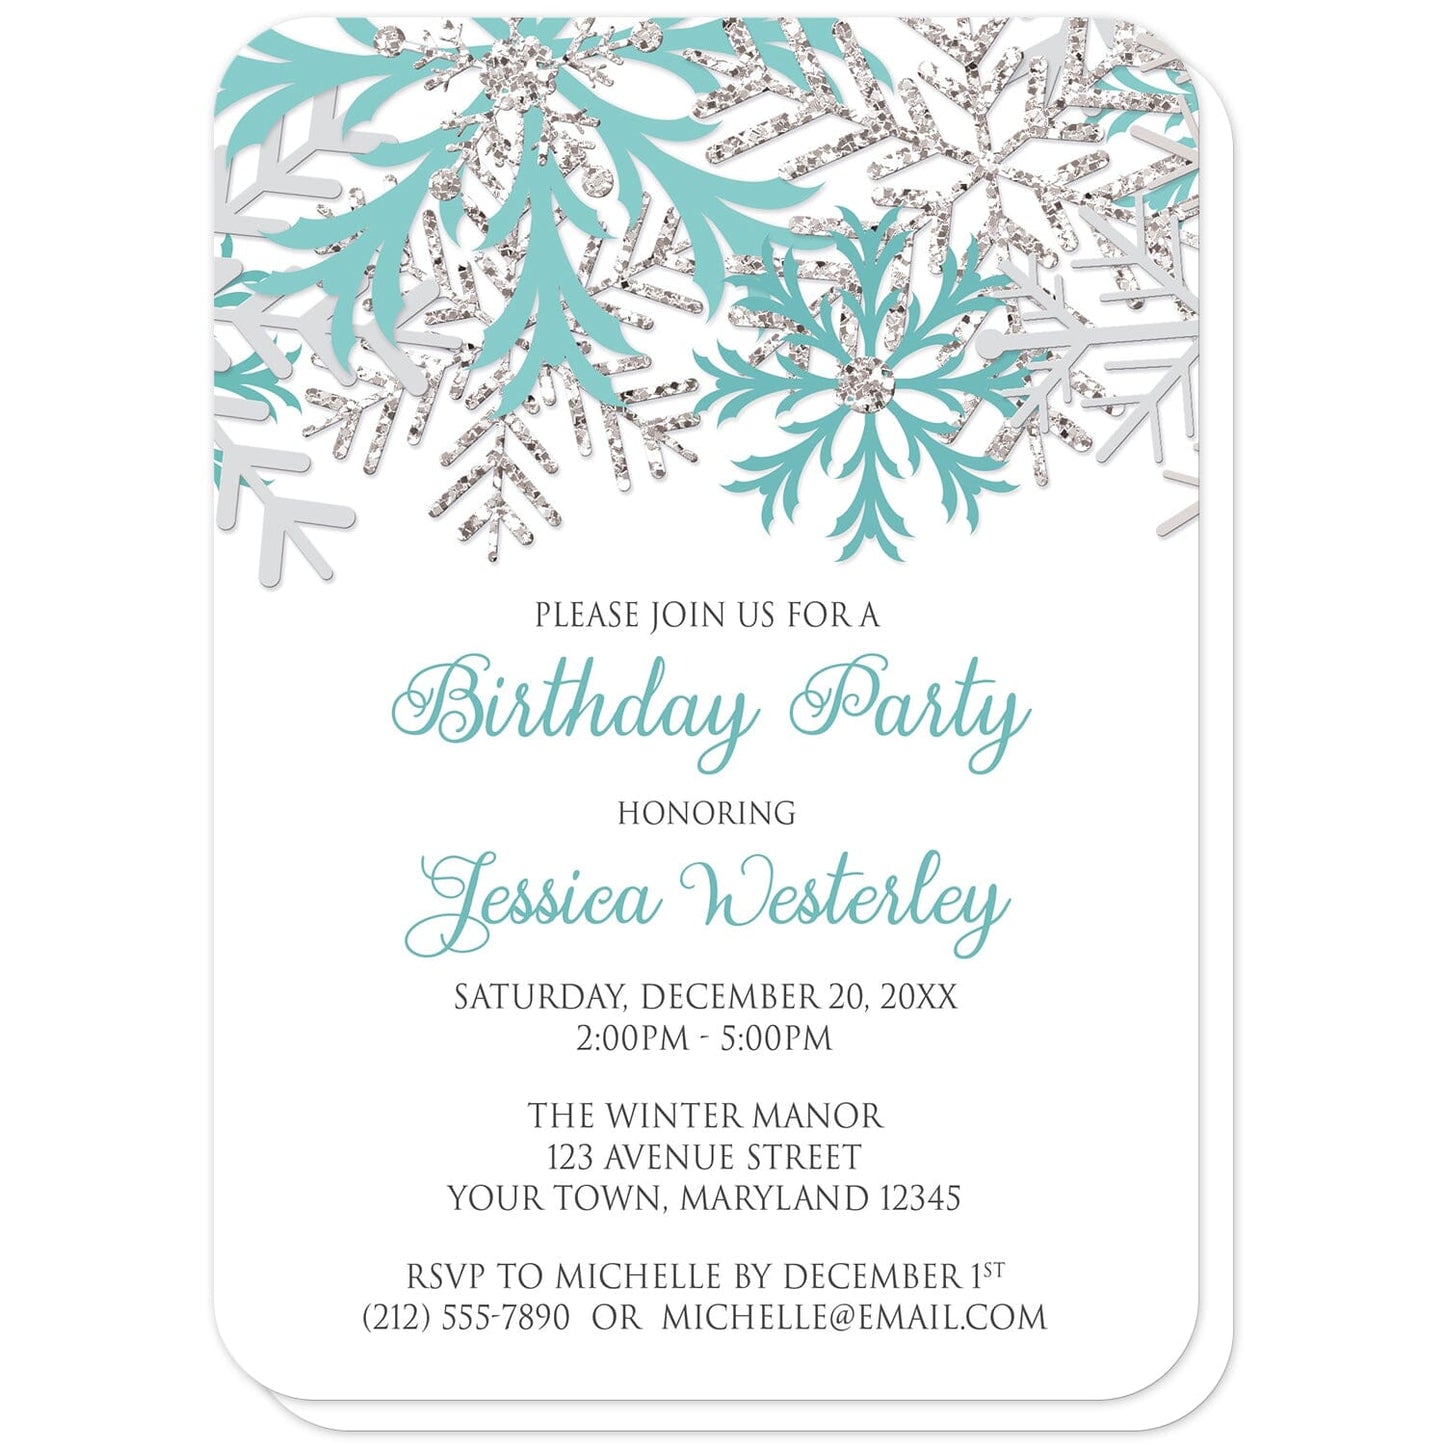 Winter Teal Silver Snowflake Birthday Party Invitations (with rounded corners) at Artistically Invited. Beautiful winter teal silver snowflake birthday party invitations designed with teal, light teal, silver-colored glitter-illustrated, and light gray snowflakes along the top over a white background. Your personalized birthday celebration details are custom printed in teal and gray below the pretty snowflakes.